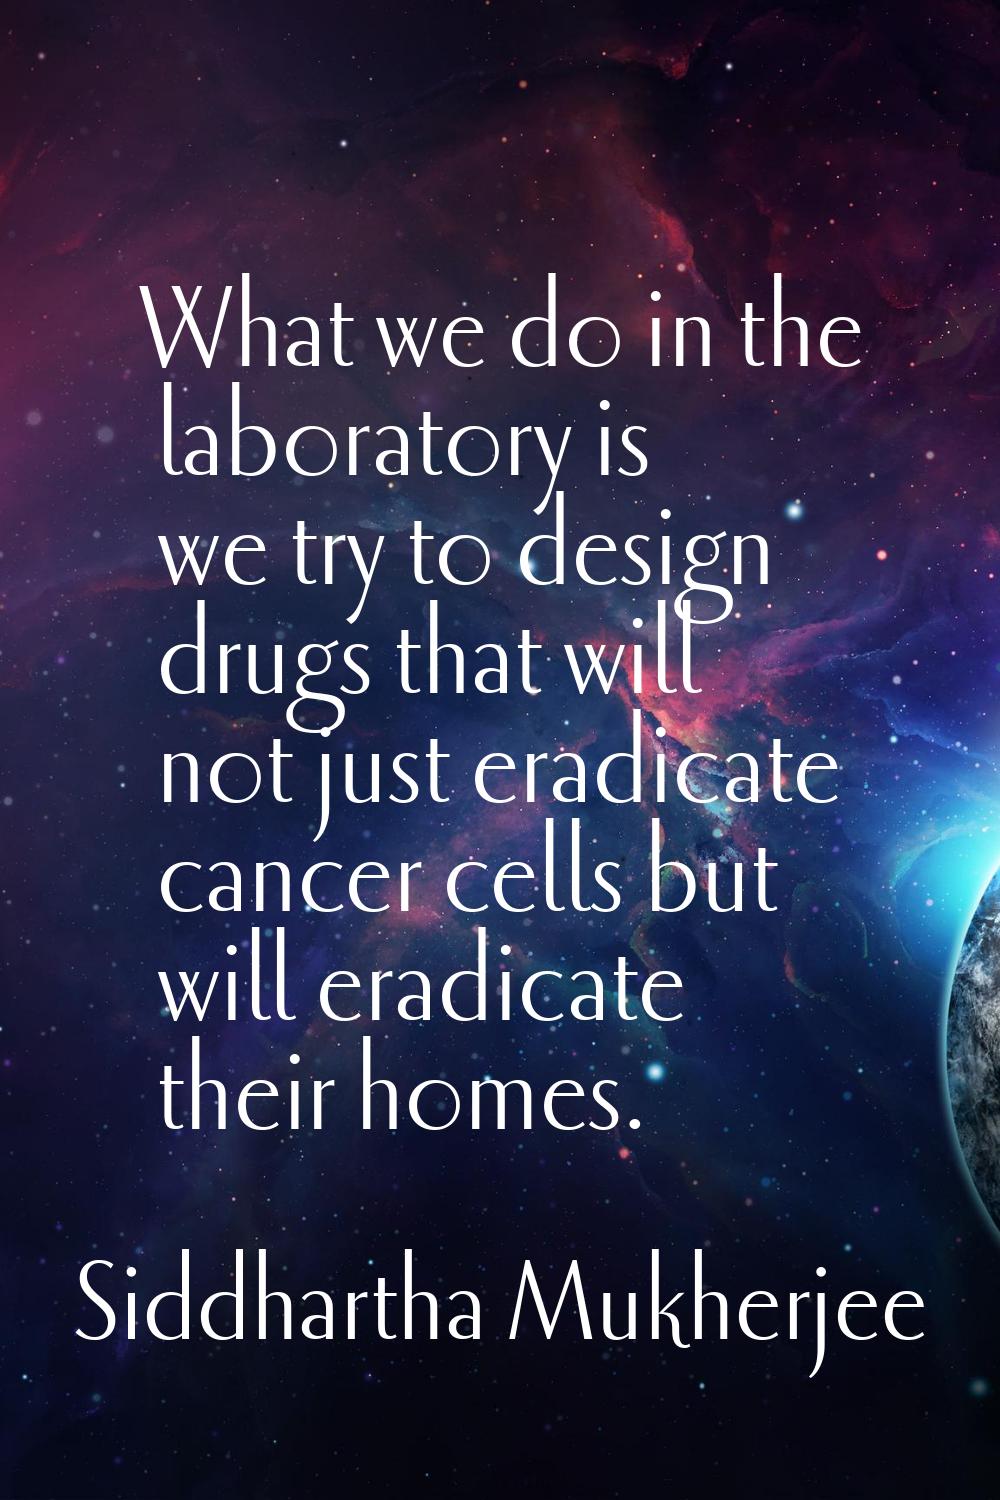 What we do in the laboratory is we try to design drugs that will not just eradicate cancer cells bu